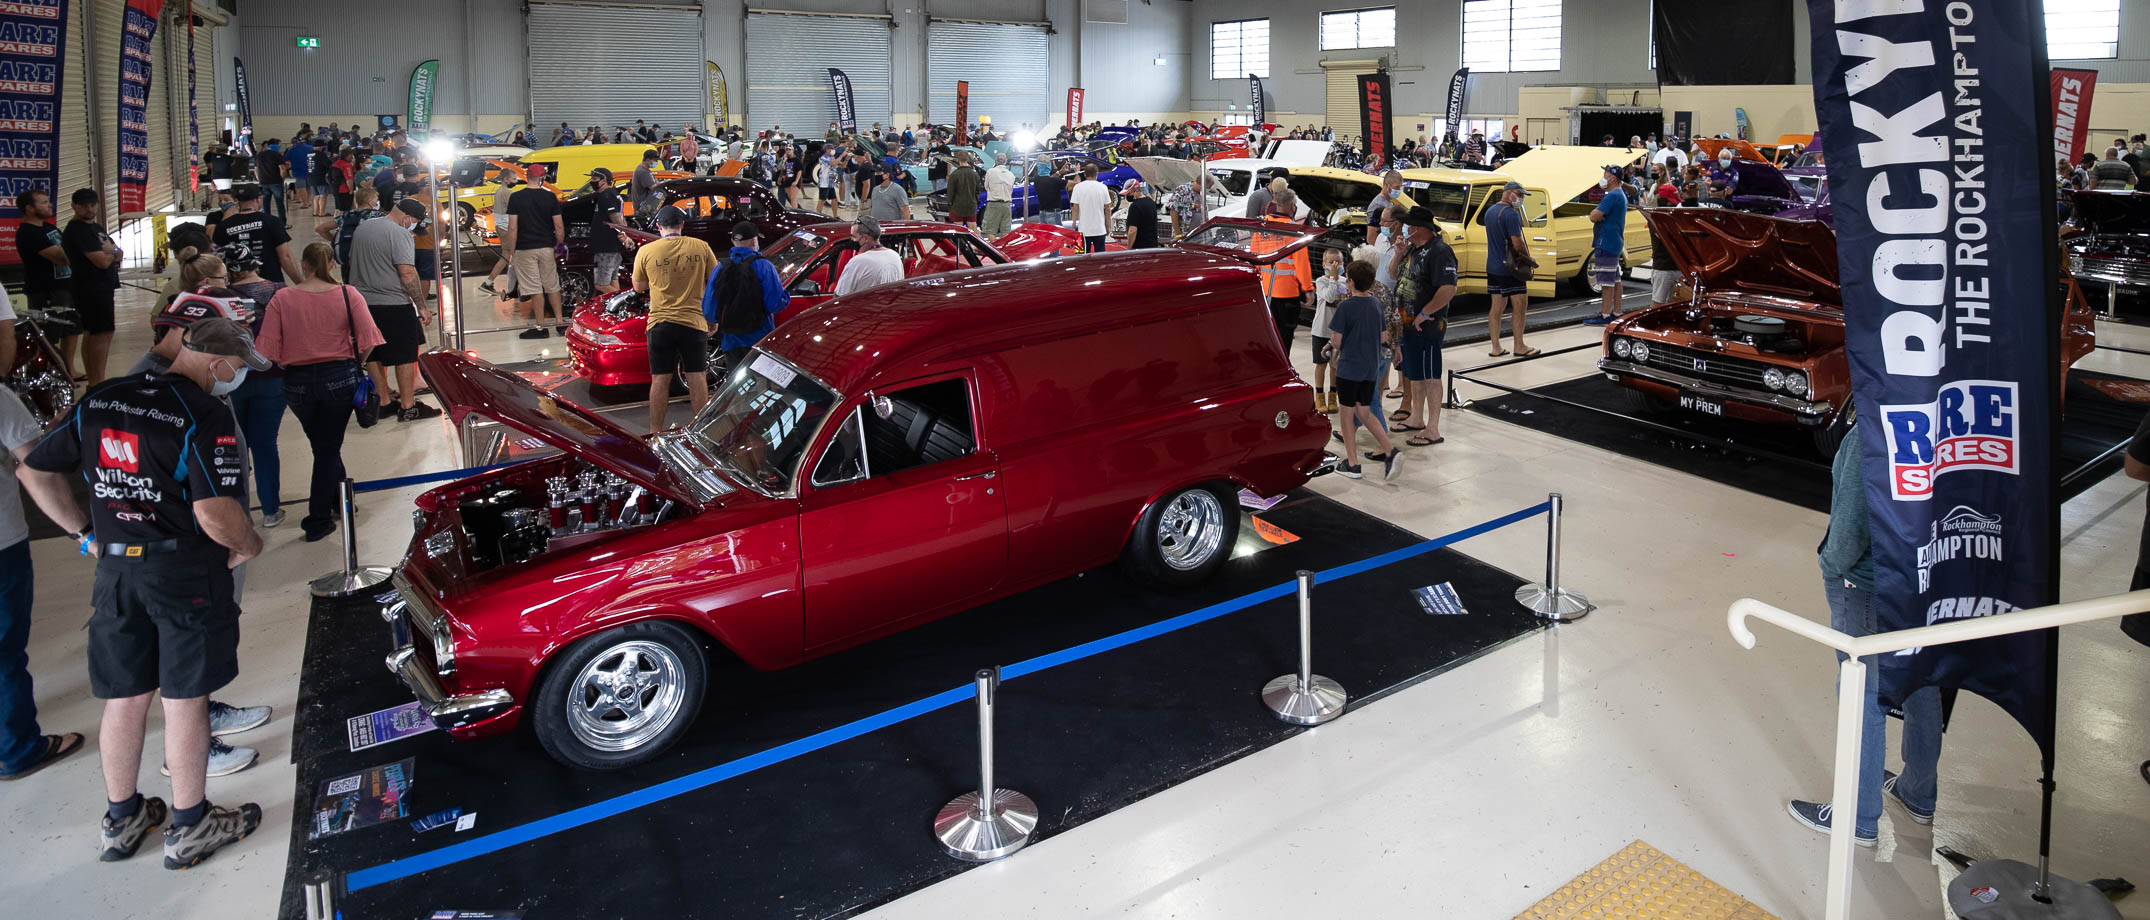 Cars on display in the Elite Pavilion